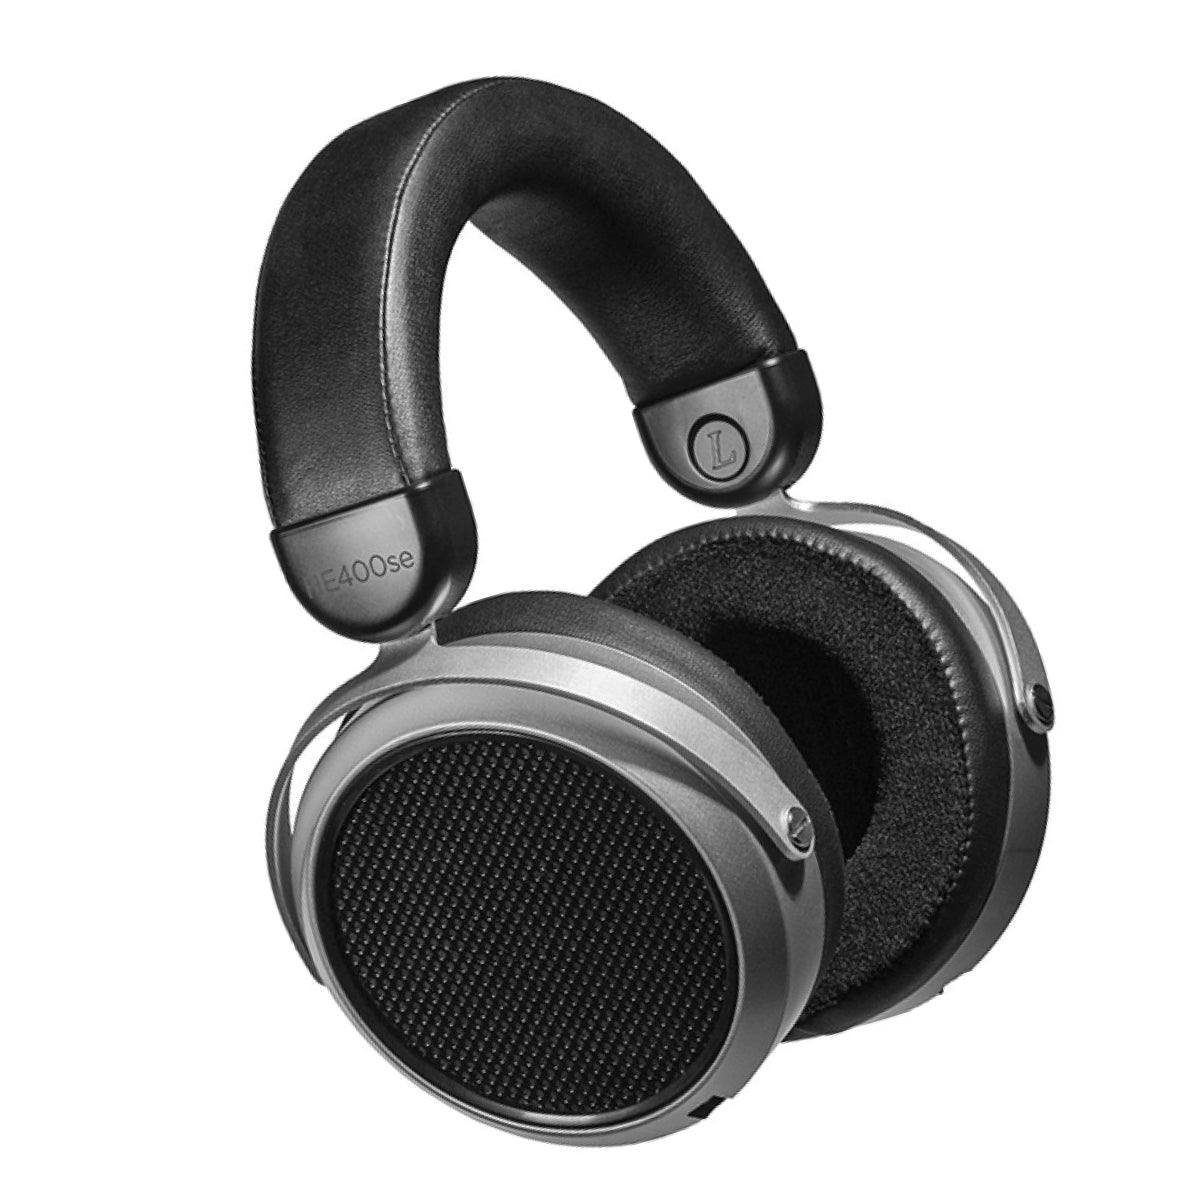 Audio Experience At Home Program - HiFiMAN HE400se Over-Ear Planar Magnetic Headphone